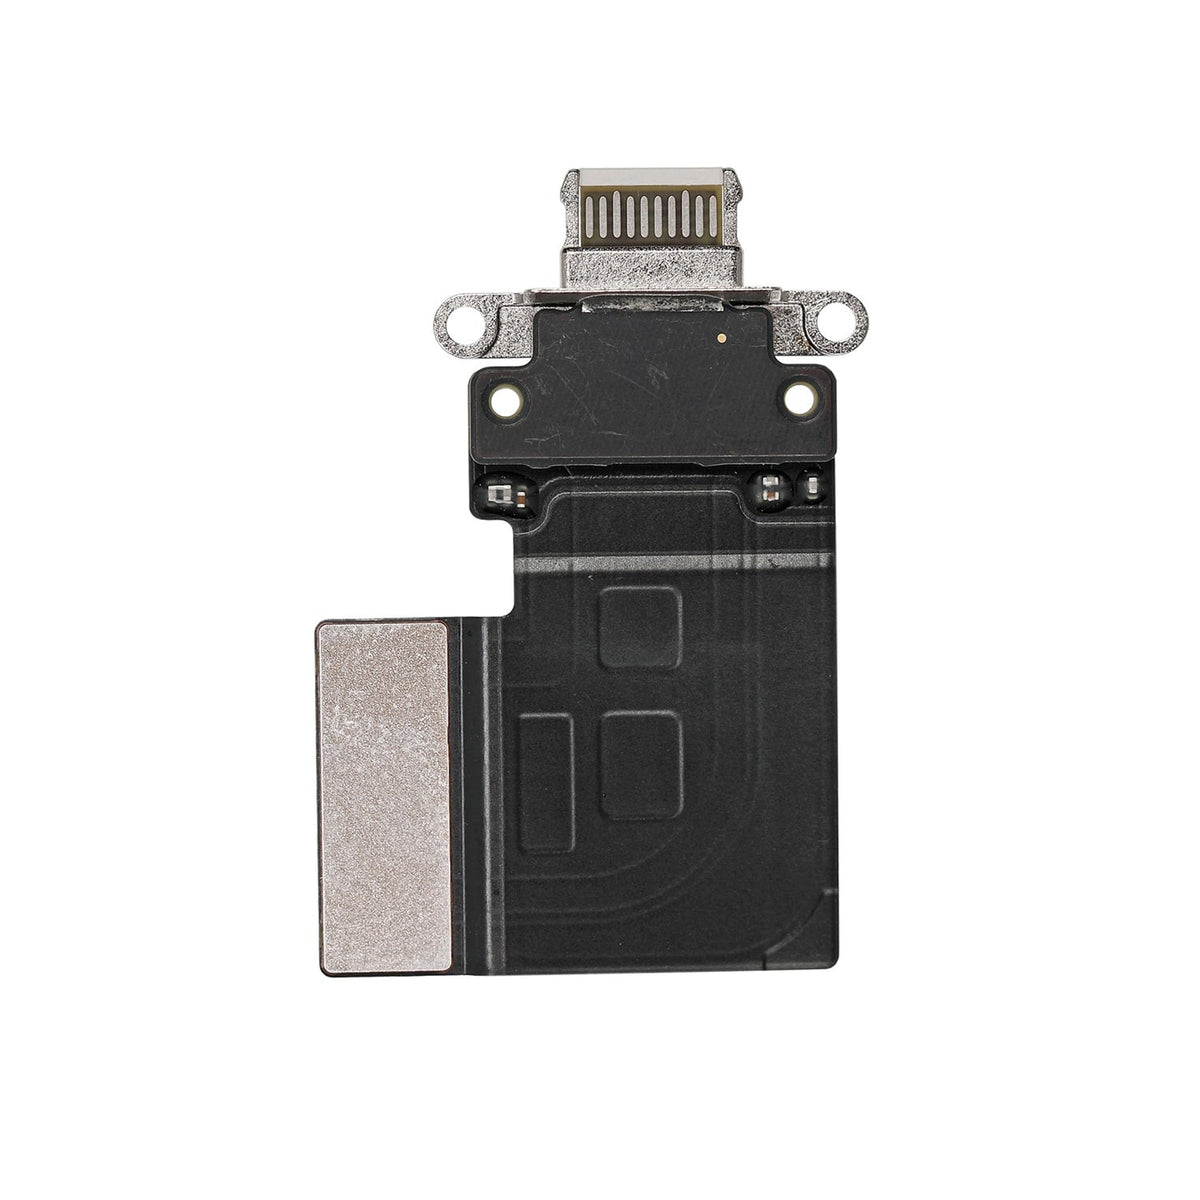 WHITE USB CHARGING CONNECTOR FLEX CABLE FOR IPAD PRO 11(1ST/2ND)/PRO 12.9 (3RD/4TH)